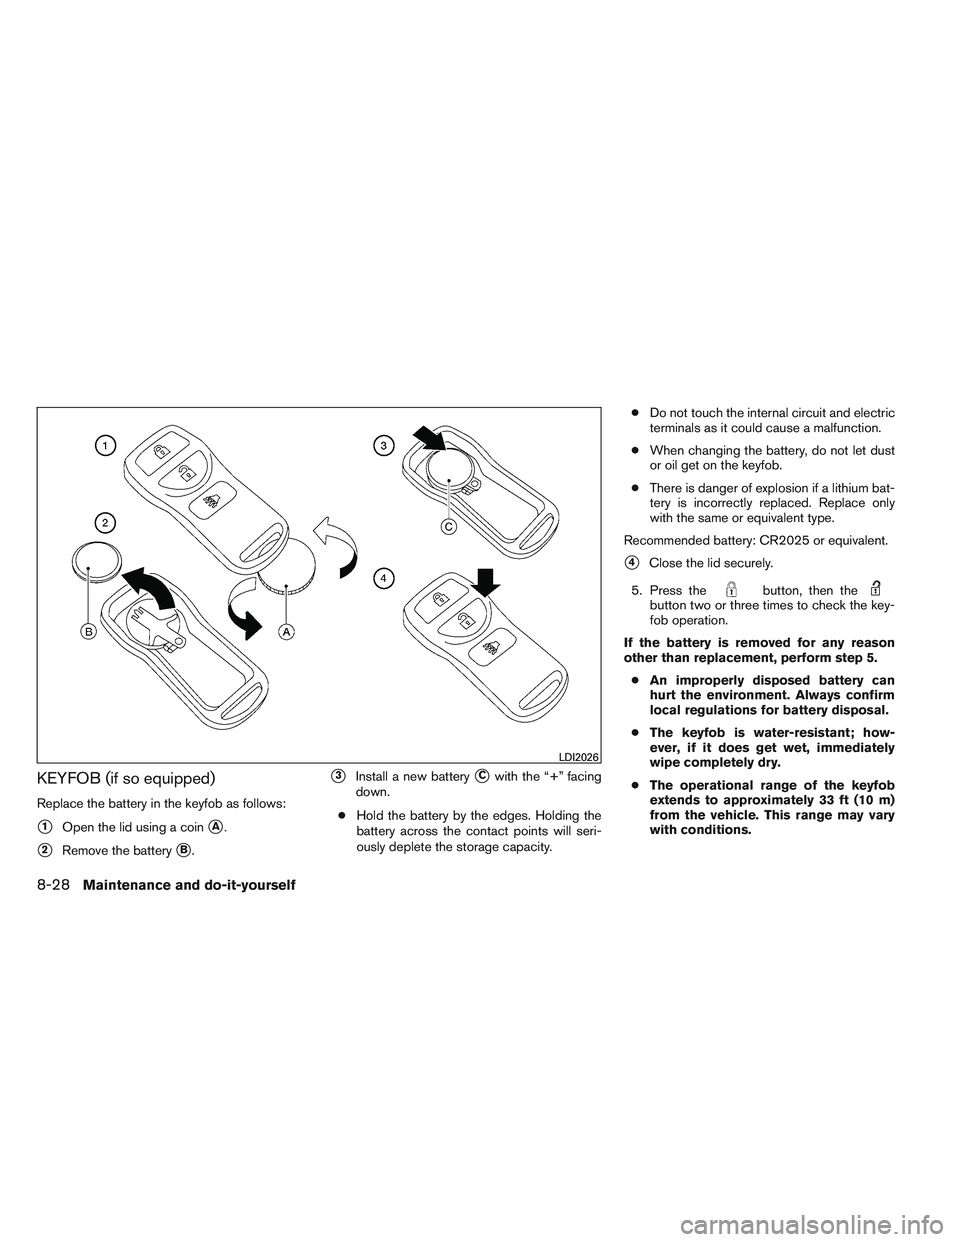 NISSAN FRONTIER 2012  Owner´s Manual KEYFOB (if so equipped)
Replace the battery in the keyfob as follows:
1Open the lid using a coinA.
2Remove the batteryB.
3Install a new batteryCwith the “+” facing
down.
● Hold the battery